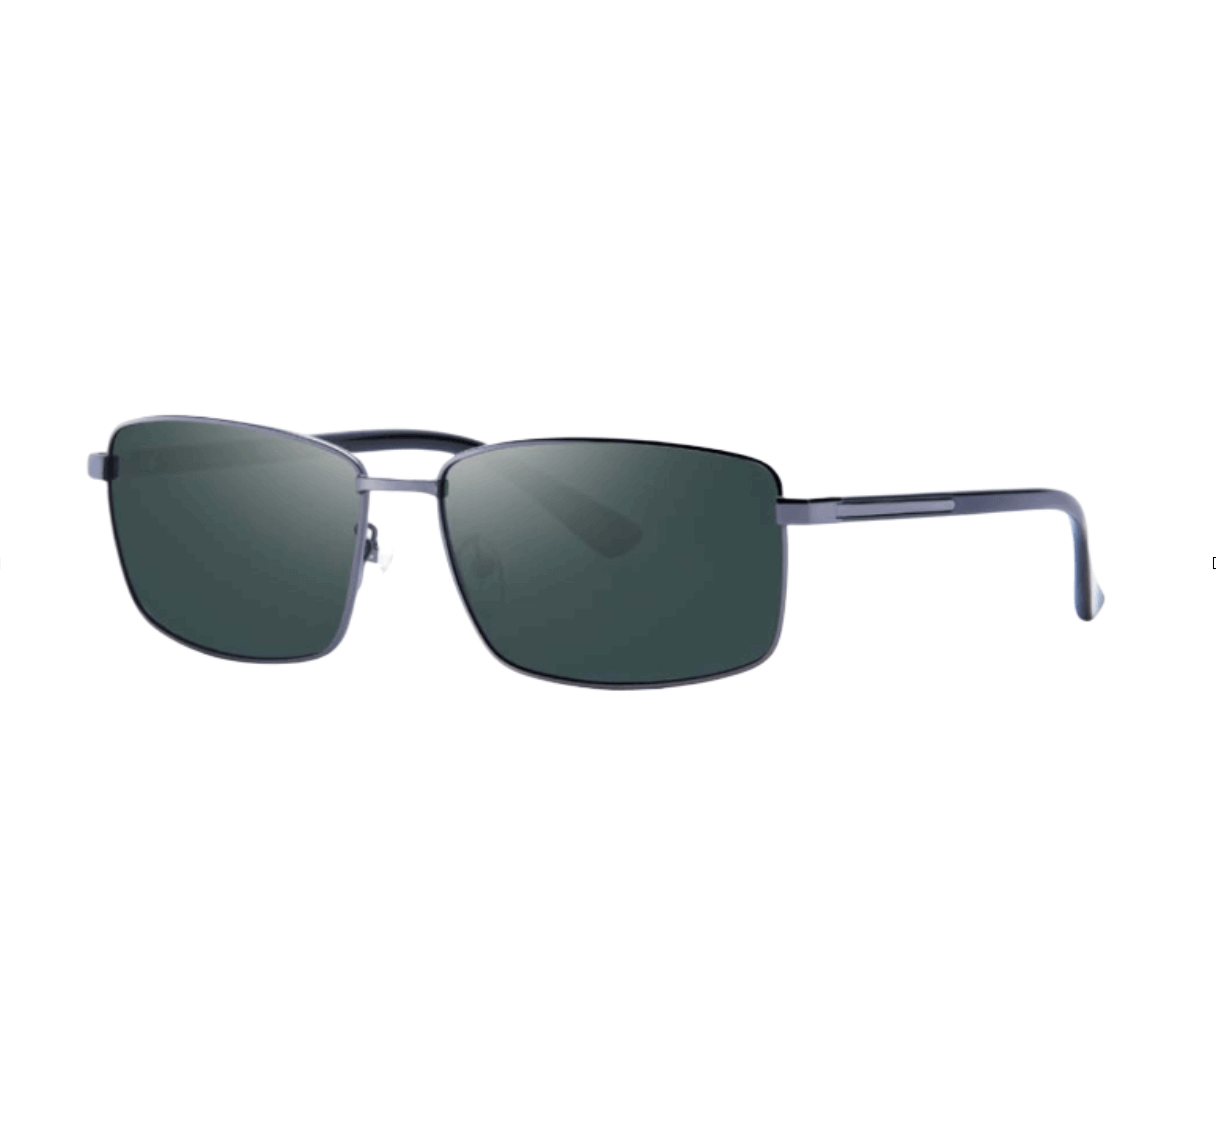 Chinese Sunglasses Manufacturers - Sunglasses Factory in China_Square Sunglasses Mens